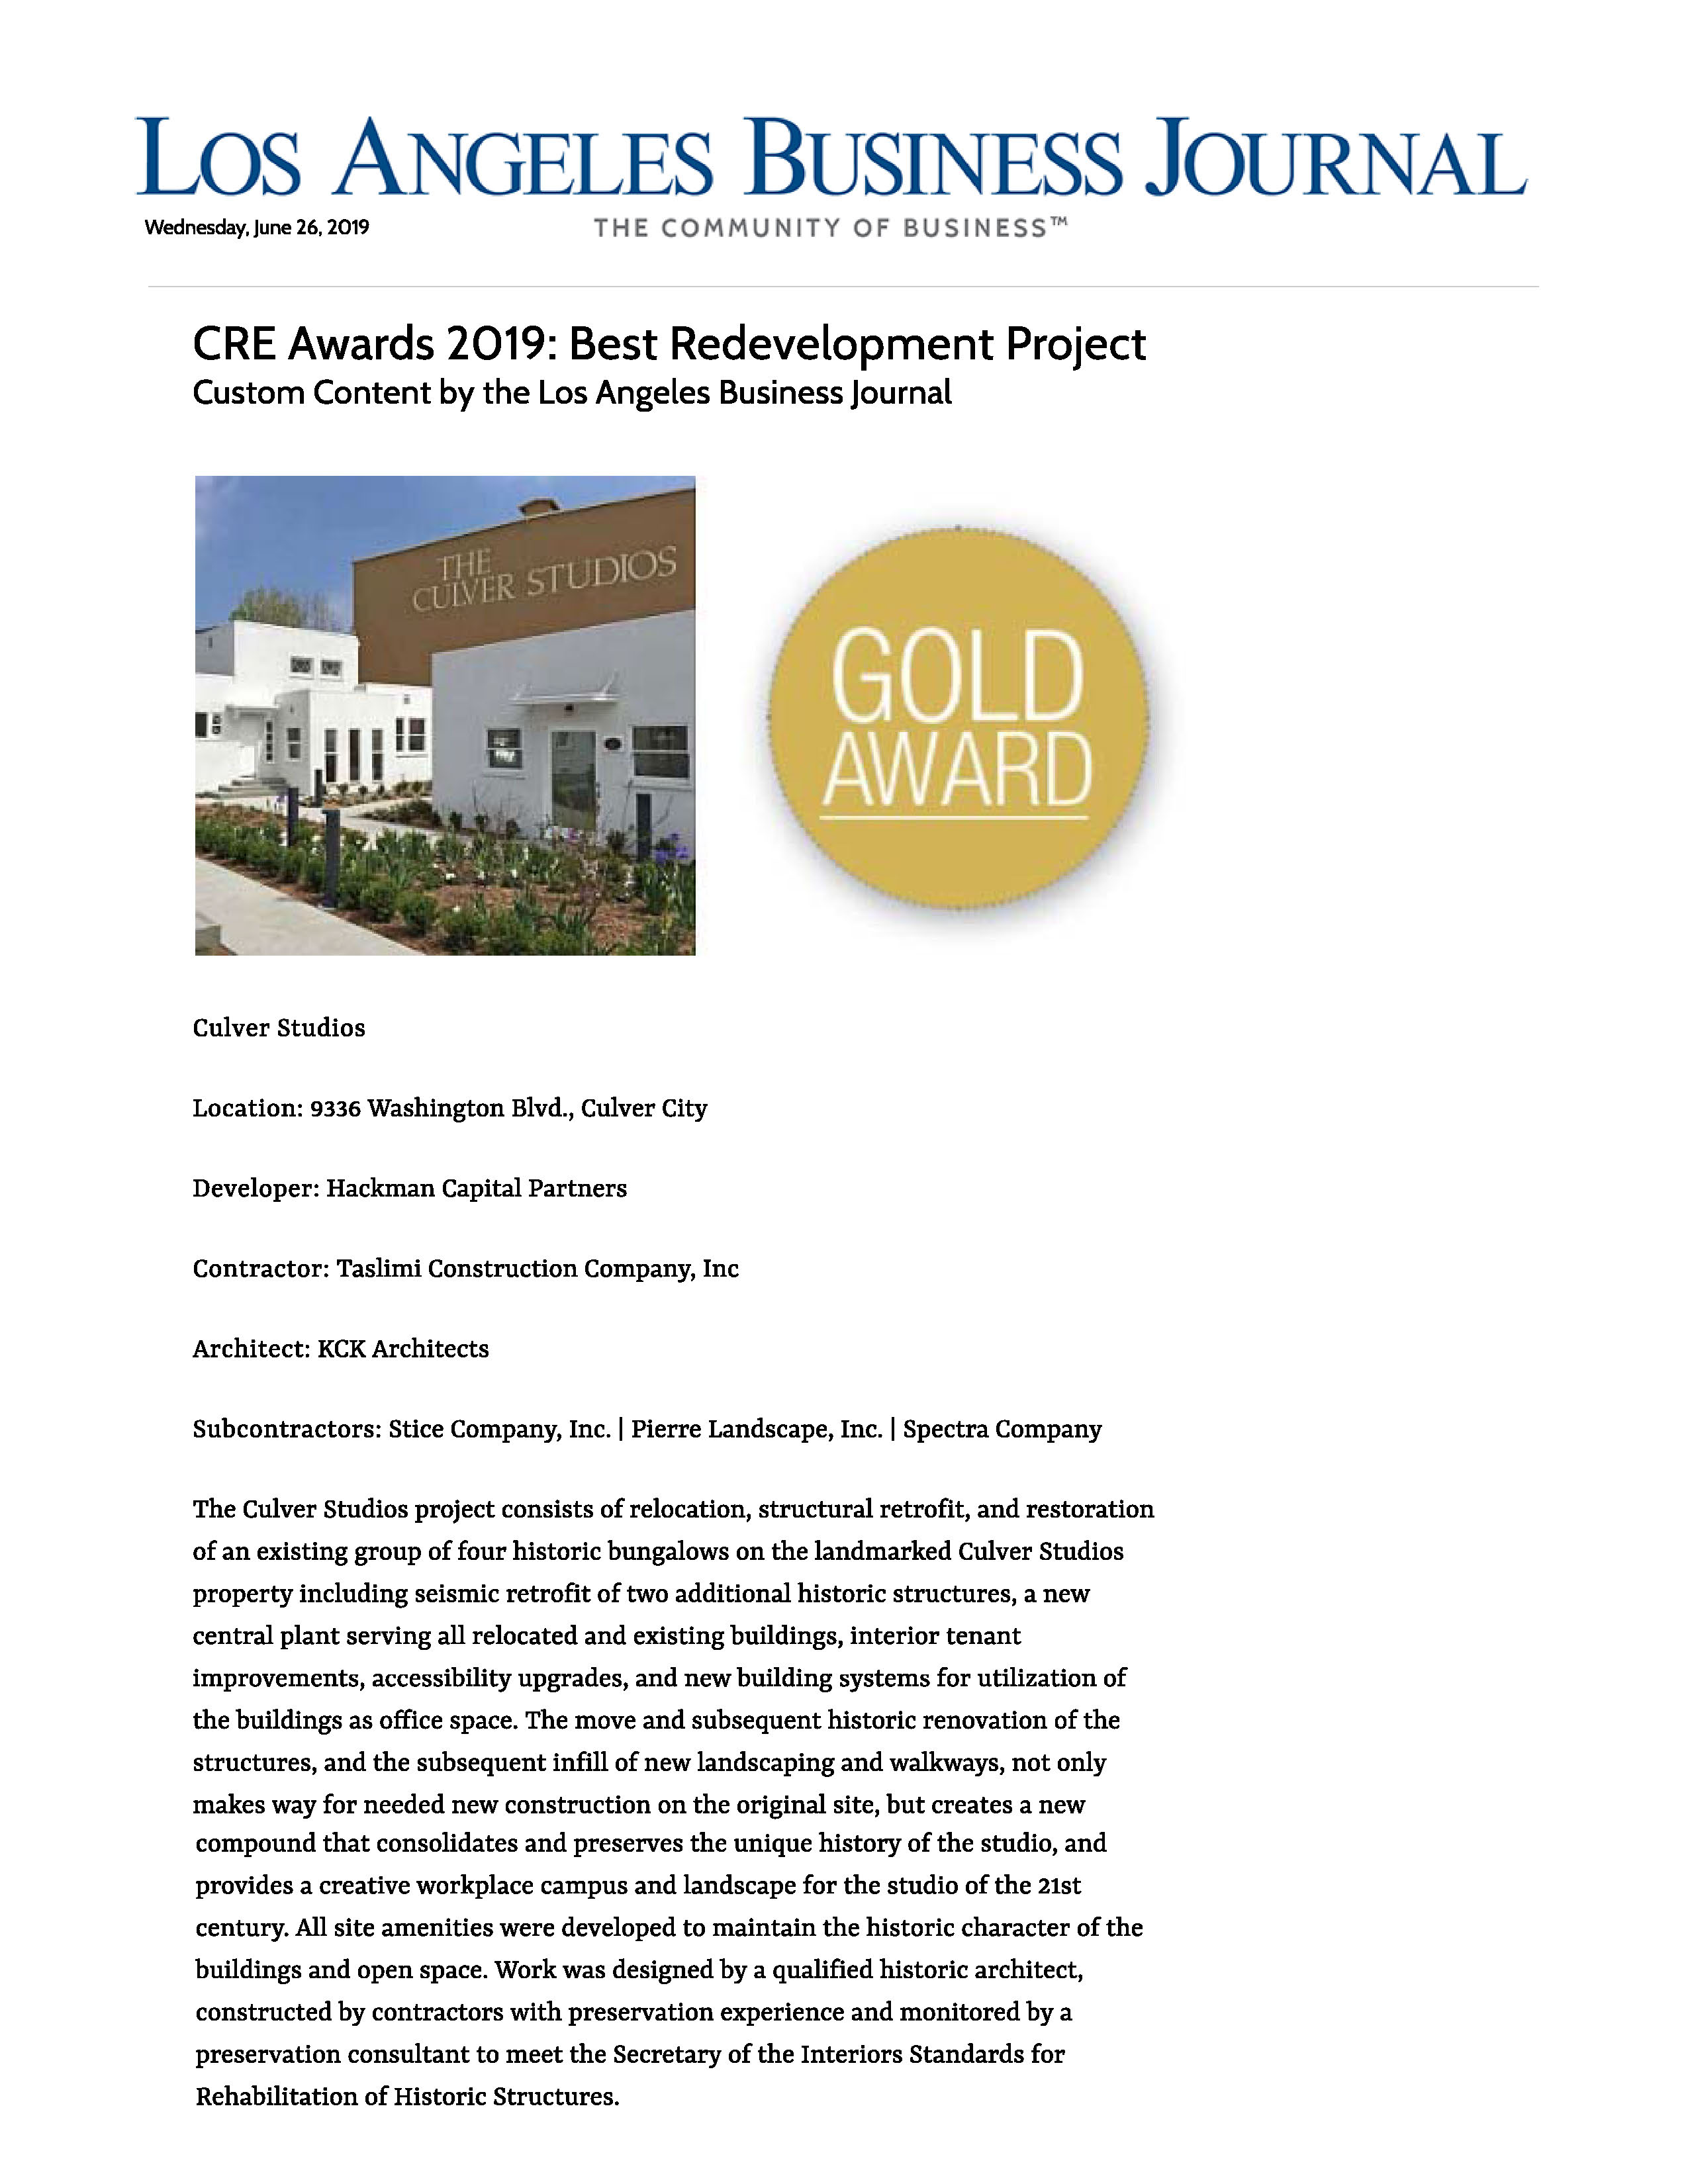 CRE-Awards-2019_-Best-Redevelopment-Project-_-Los-Angeles-Business-Journal